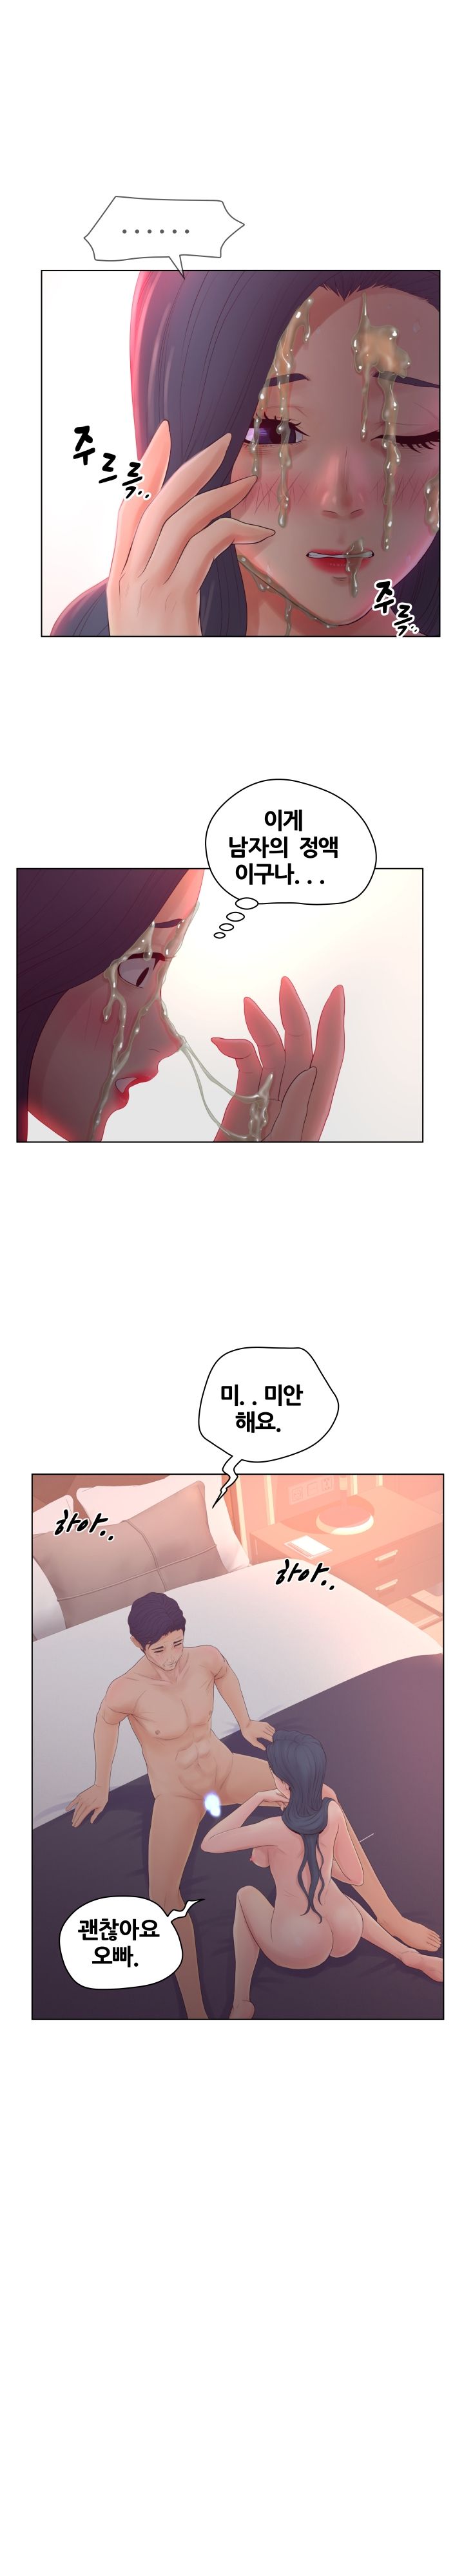 Share Girls Raw - Chapter 12 Page 6